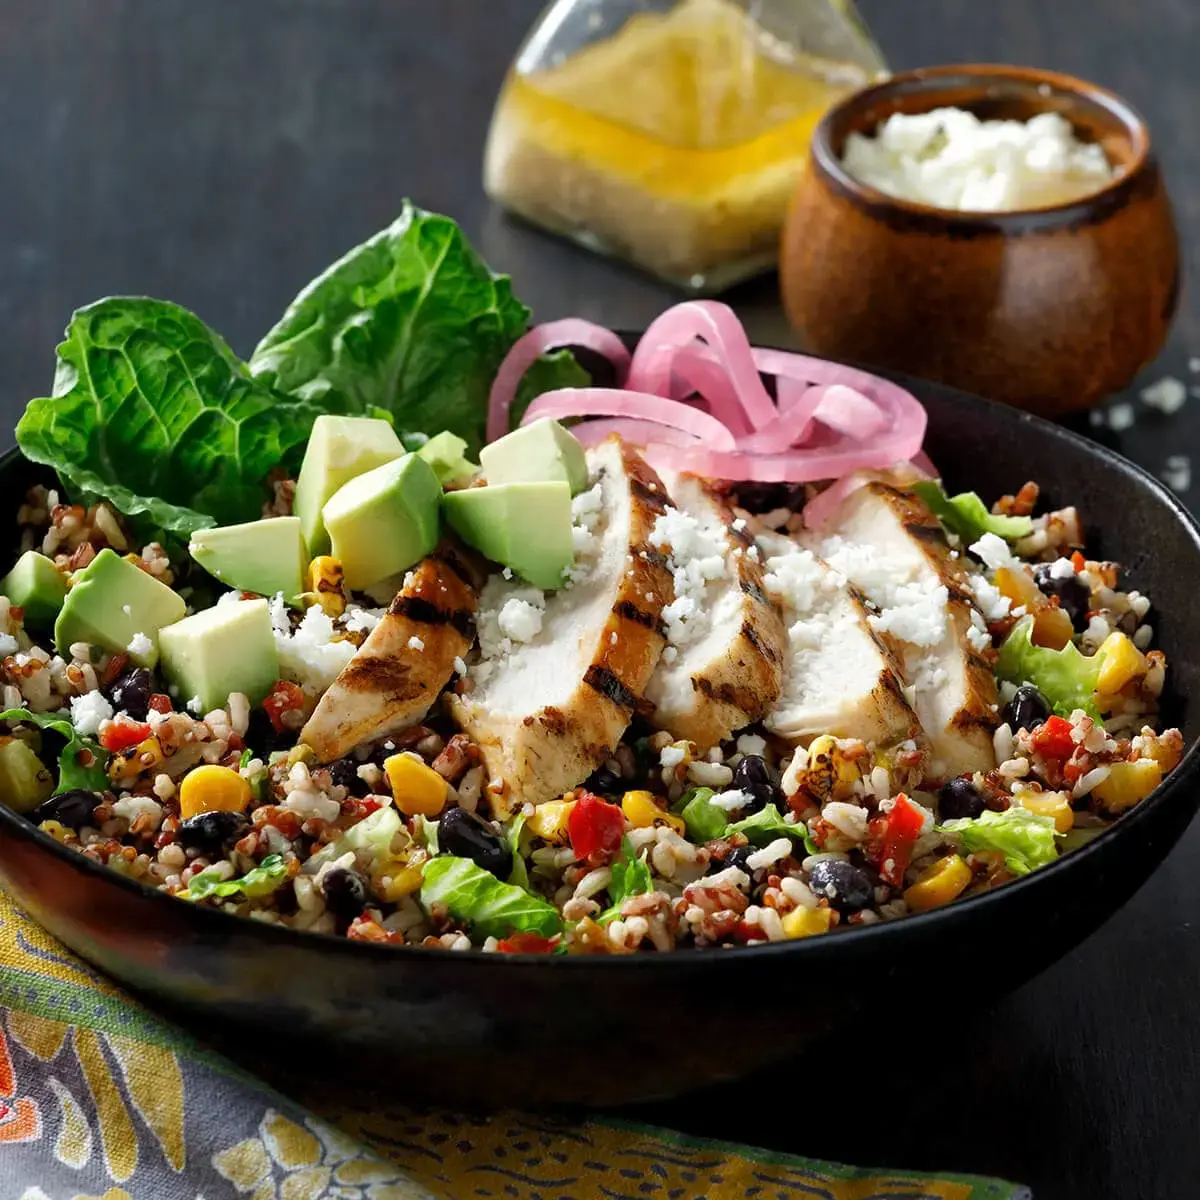 Grilled Chicken, Grain & Fire-Roasted Vegetable Bowl Recipe Card